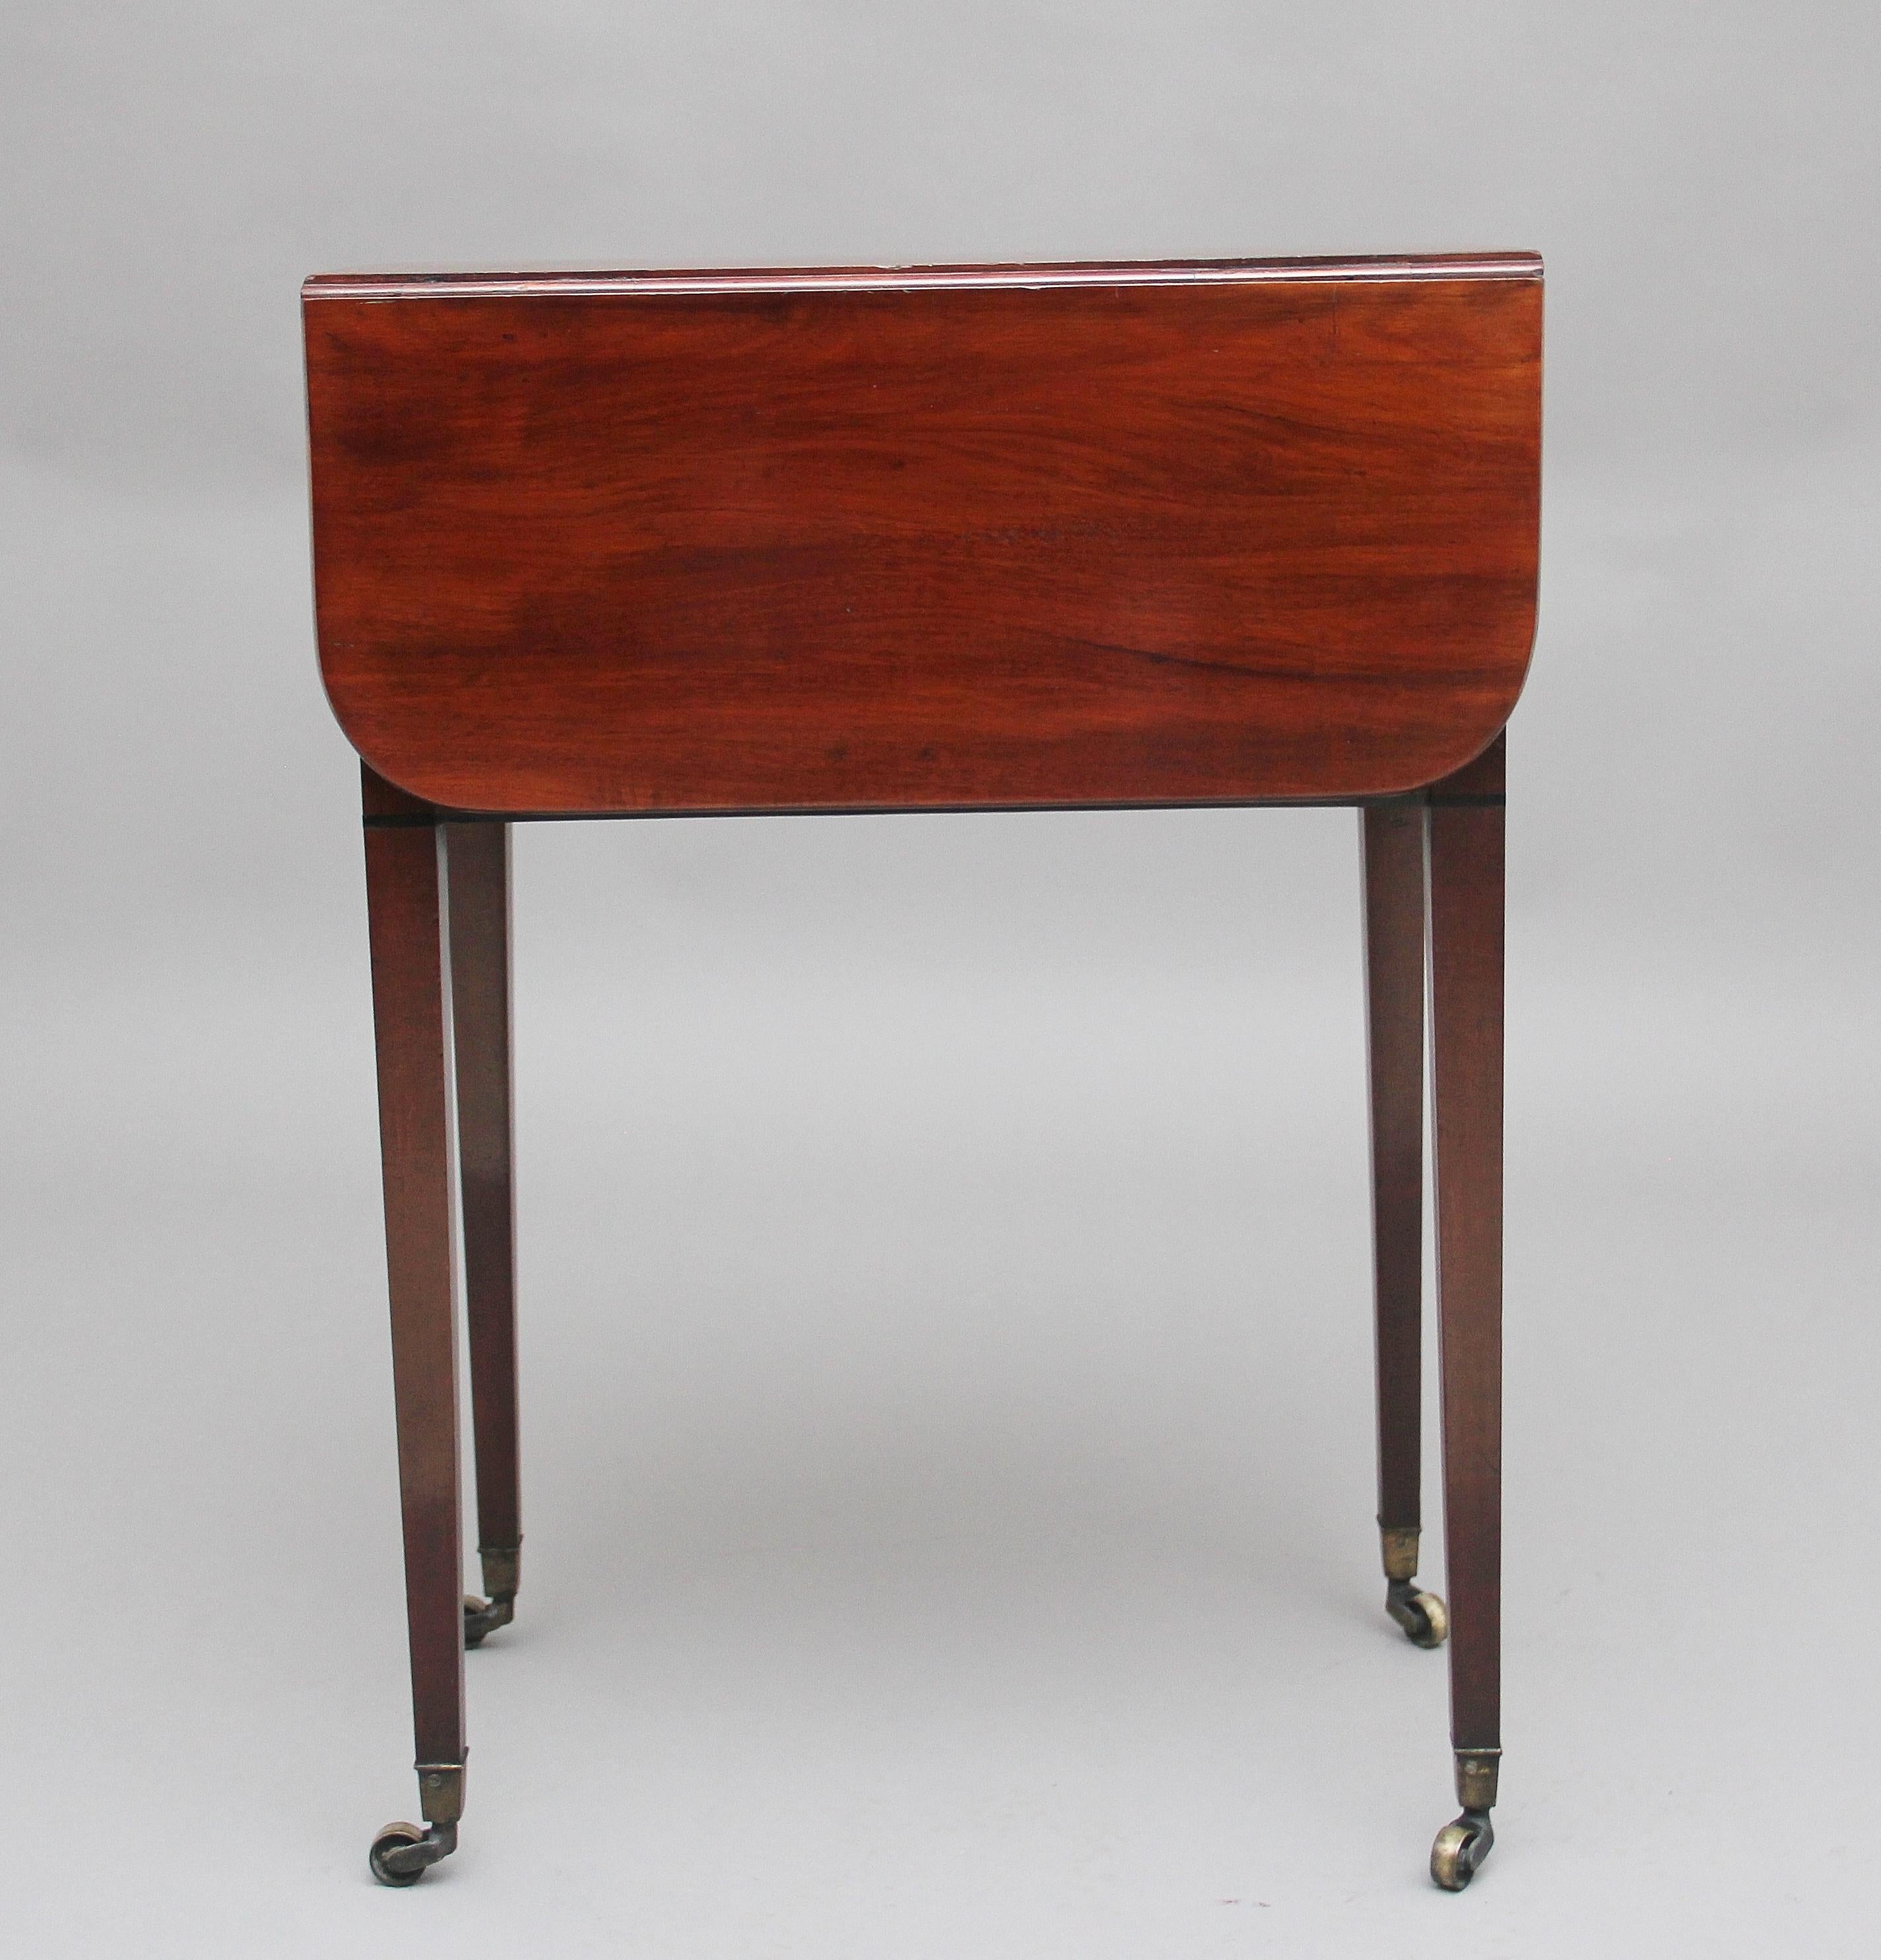 Early 19th Century Mahogany Pembroke Table In Good Condition For Sale In Martlesham, GB